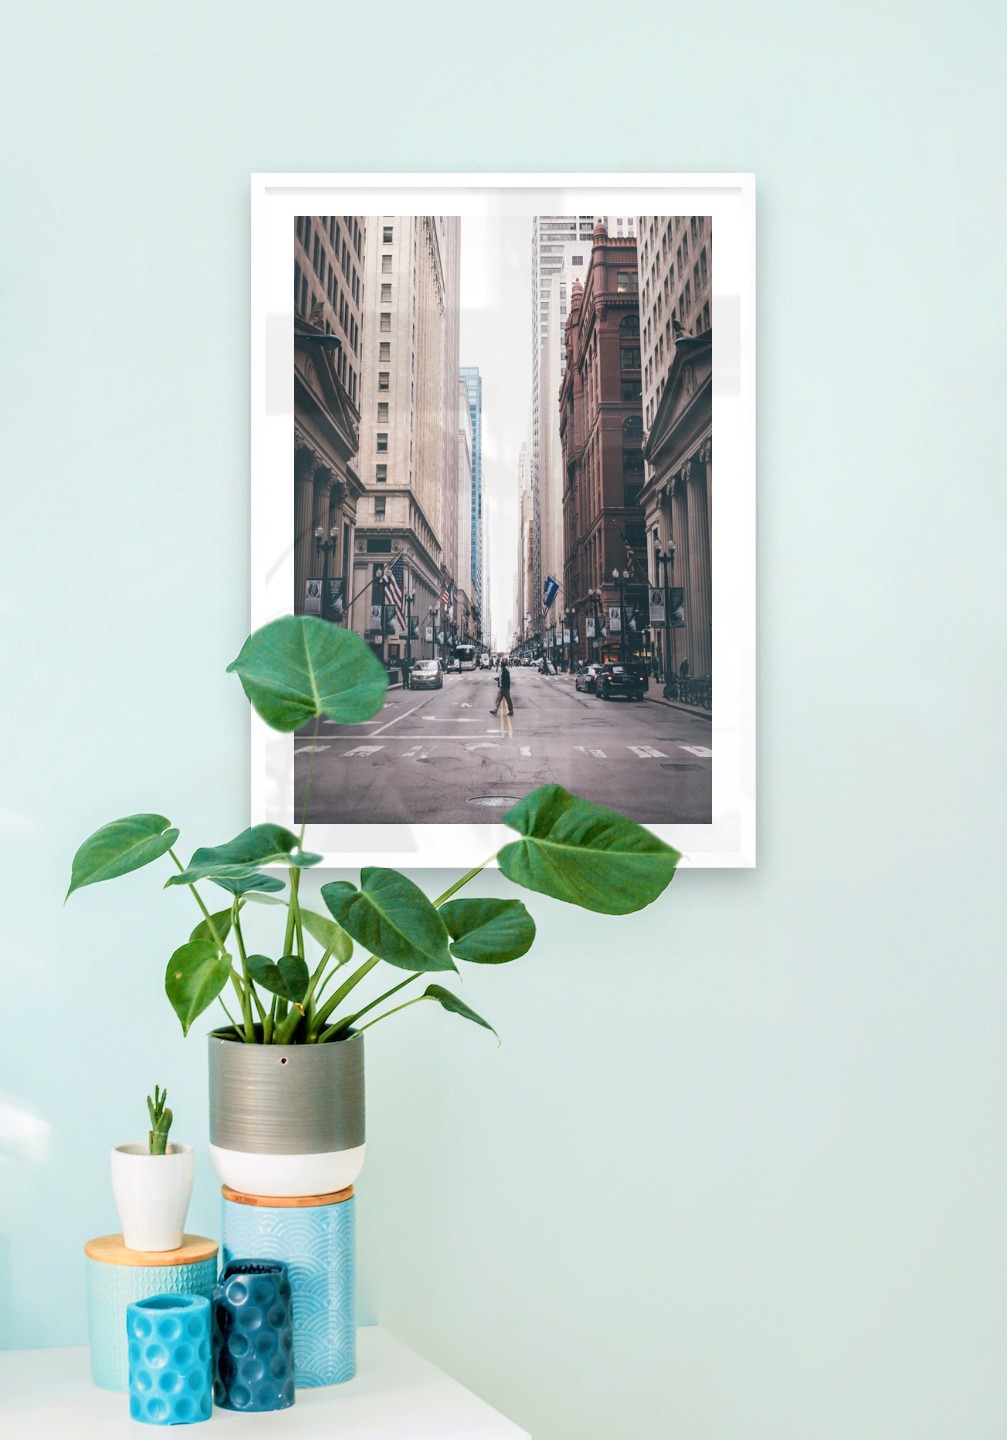 Gallery wall with picture frame in white in size 50x70 with print "Man walking across the street"